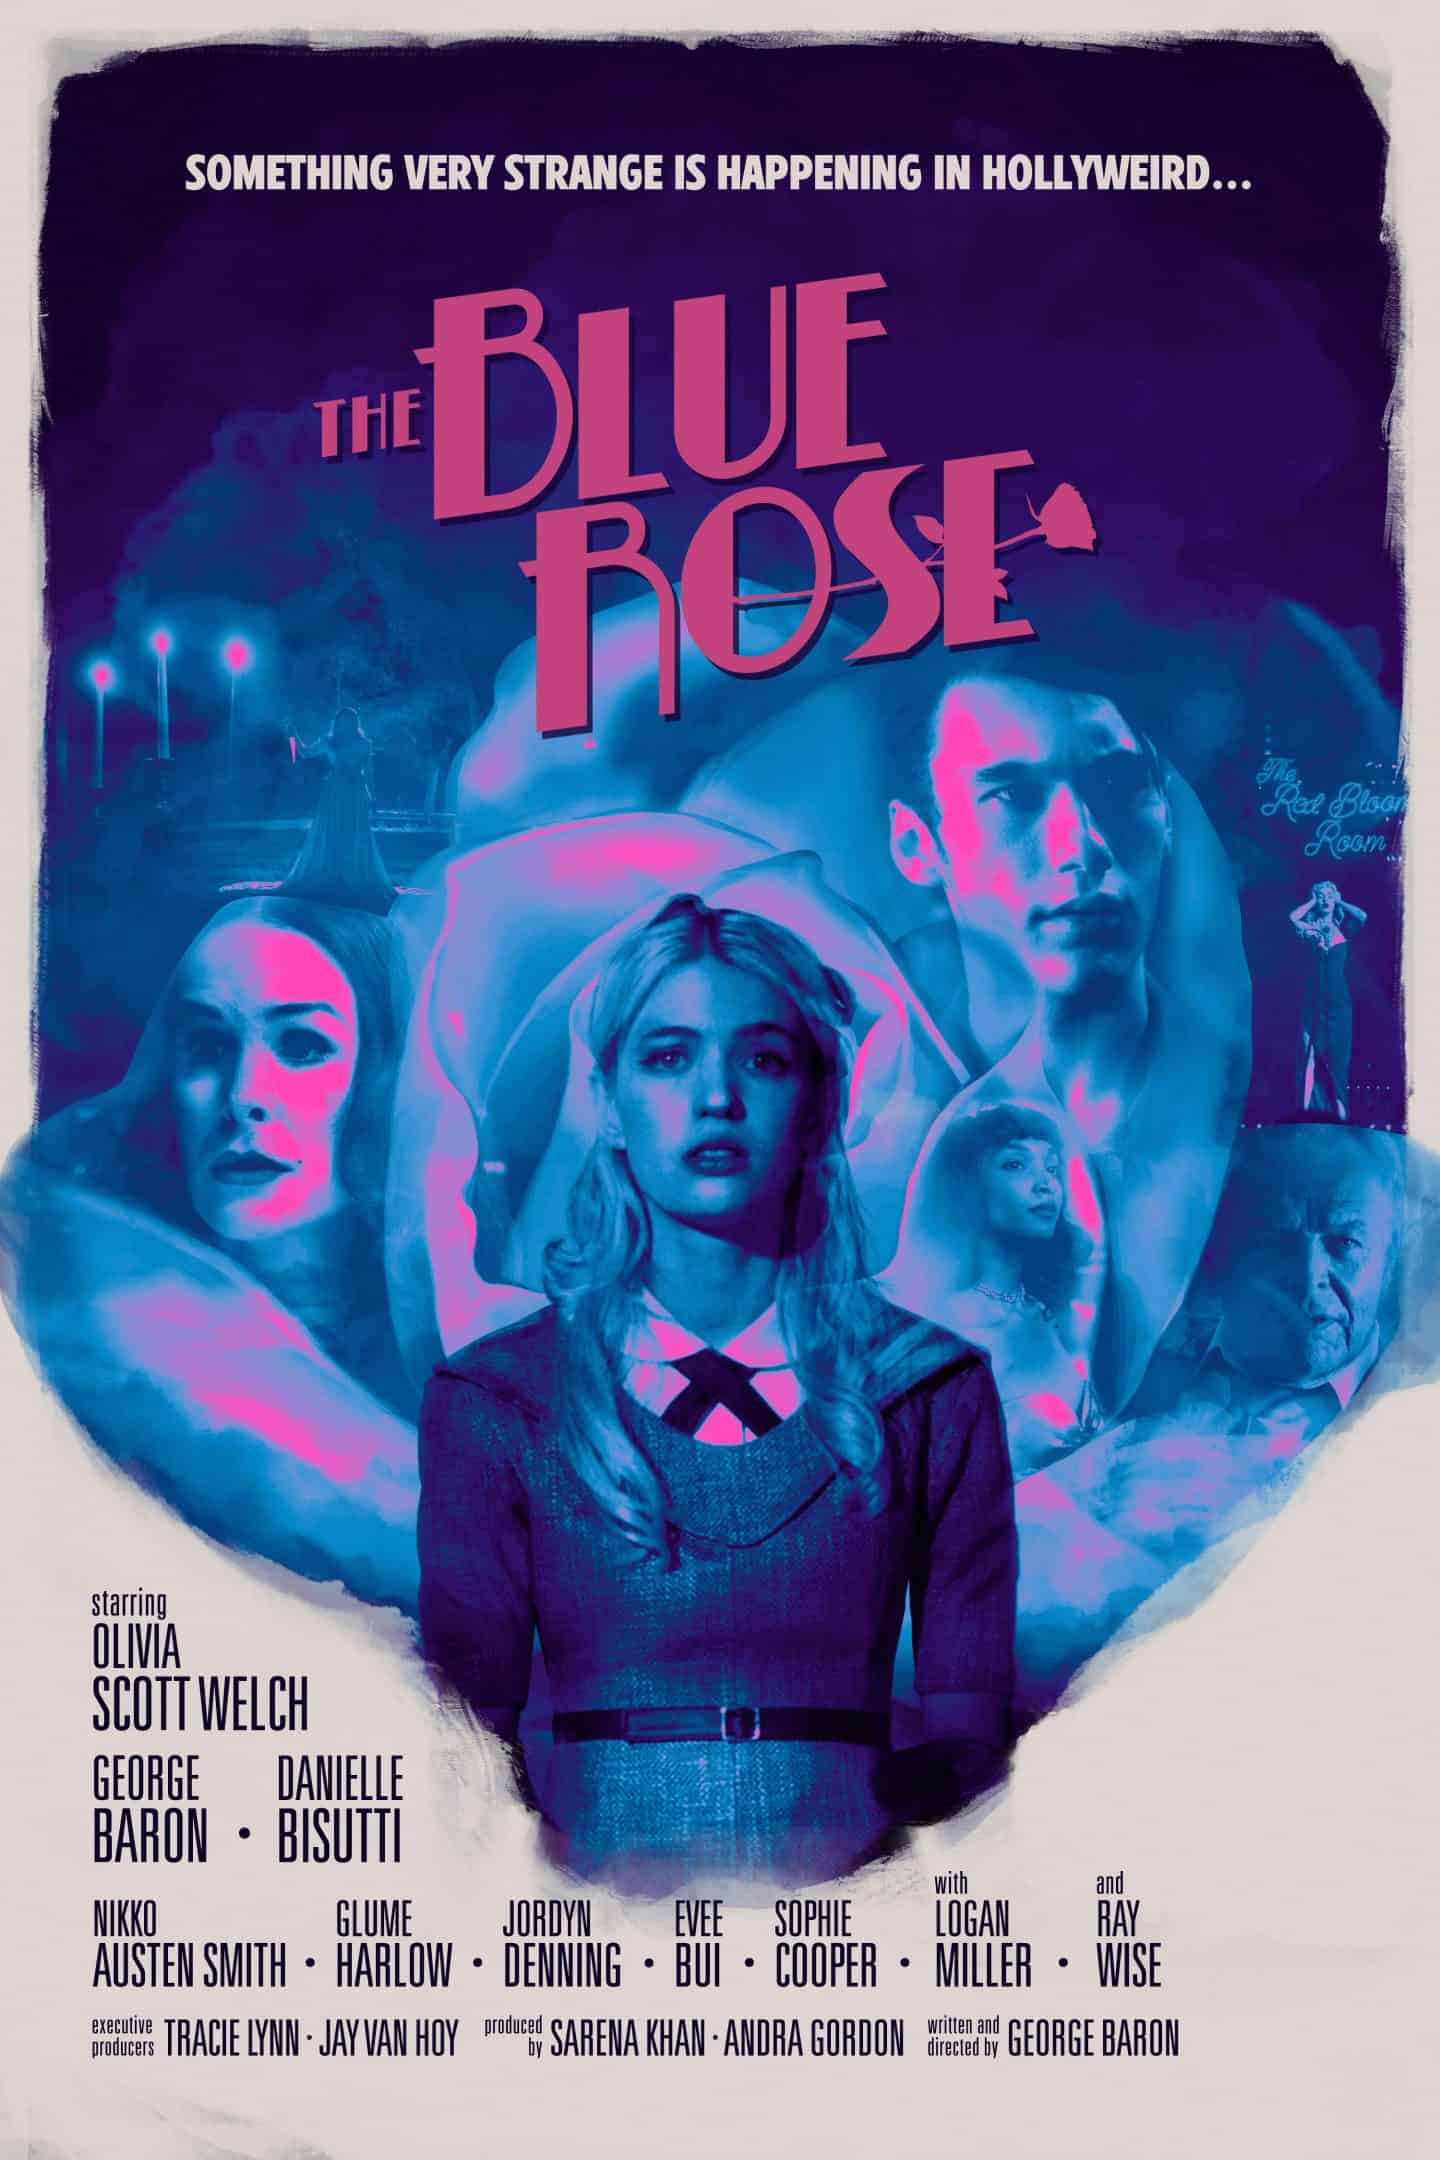 The Blue Rose hits theaters and VOD on July 12th 1